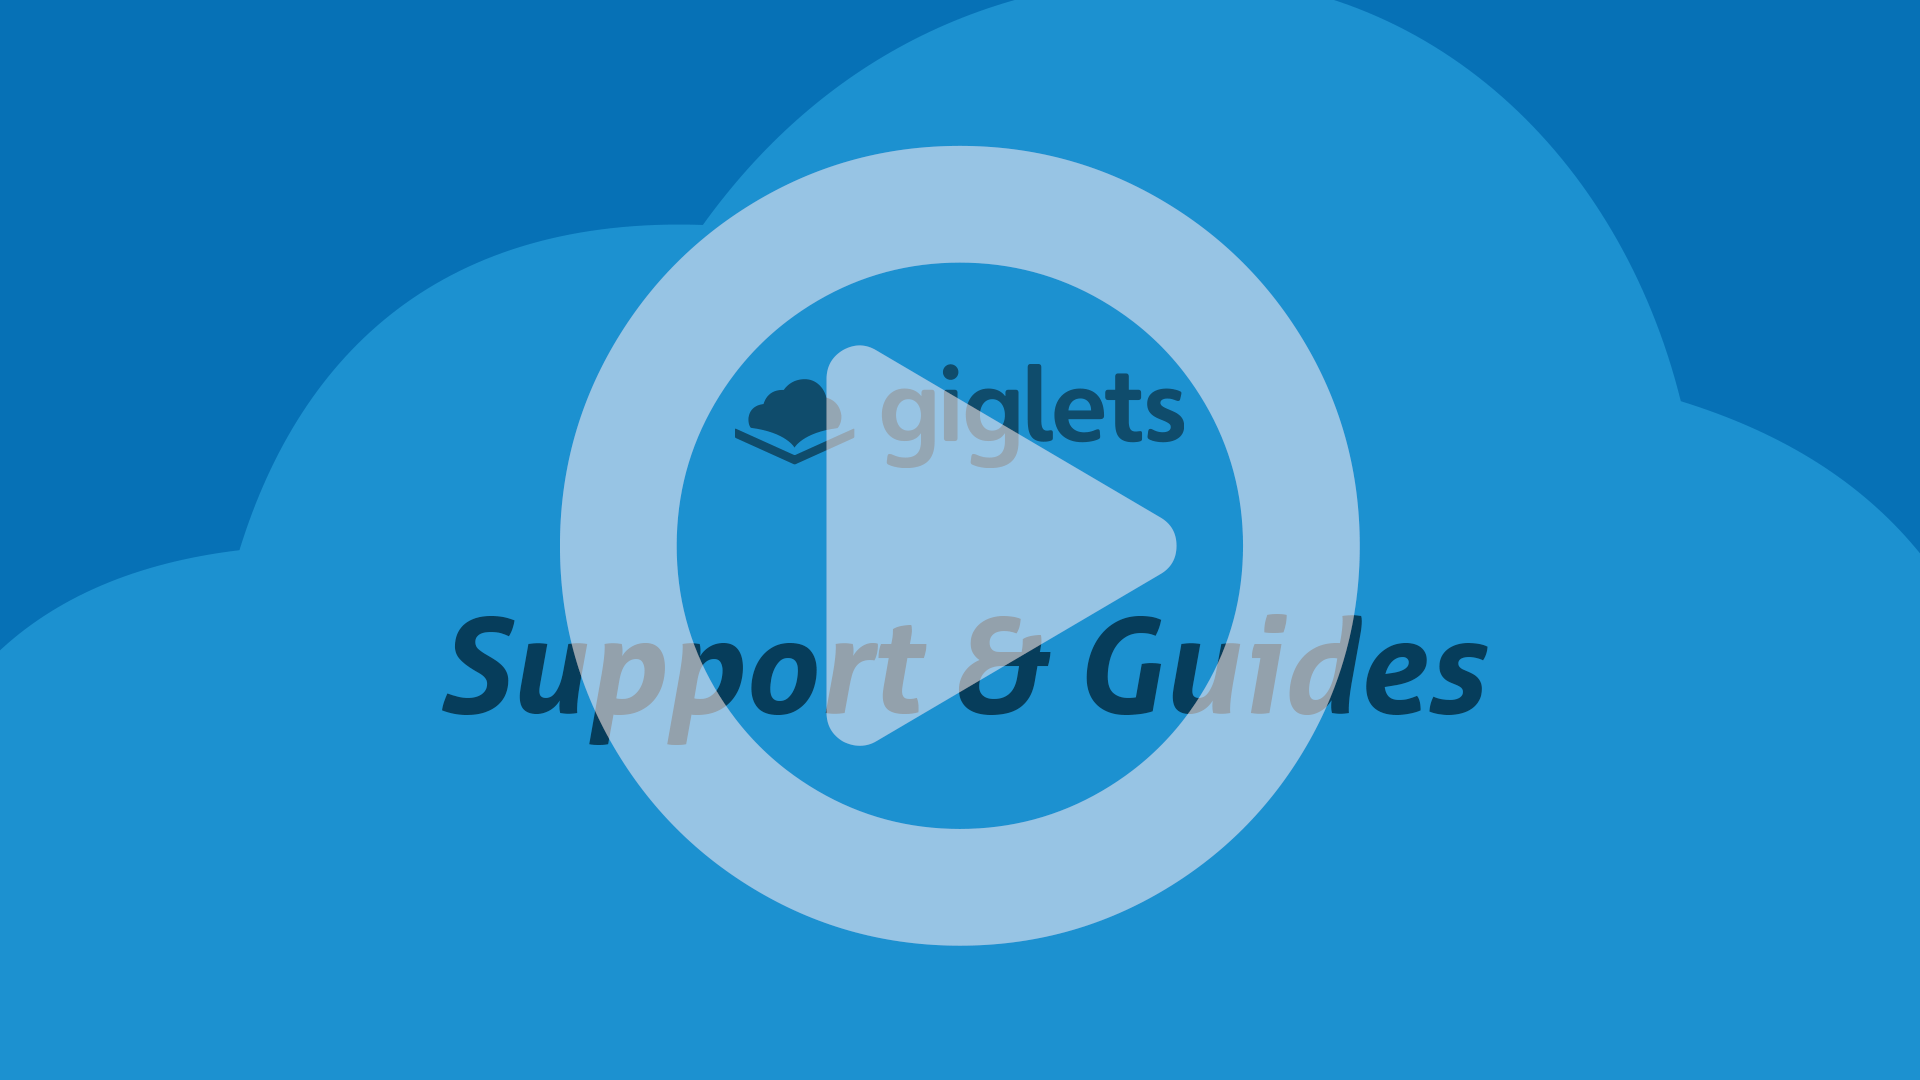 How your pupils can use Giglets